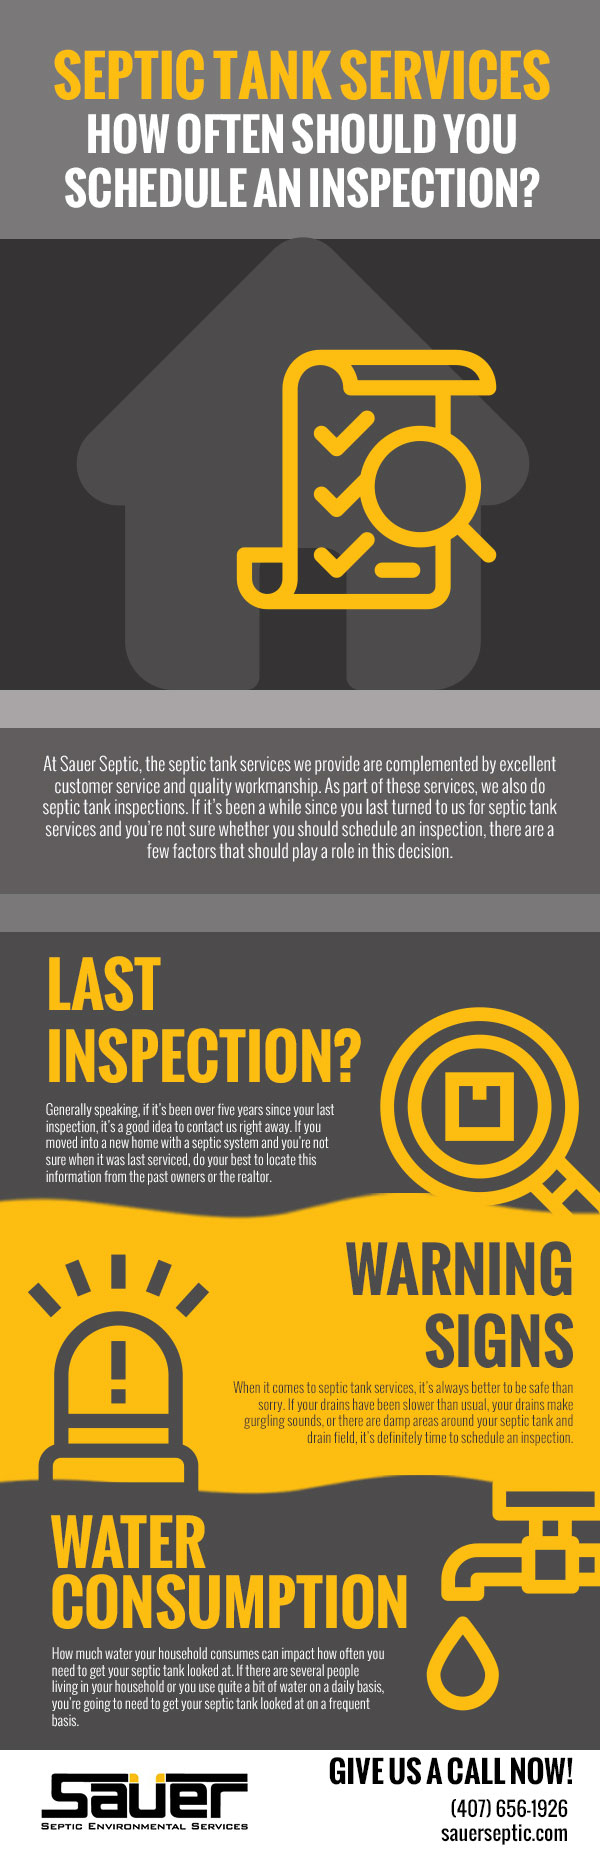 Septic Tank Services: How Often Should You Schedule an Inspection?